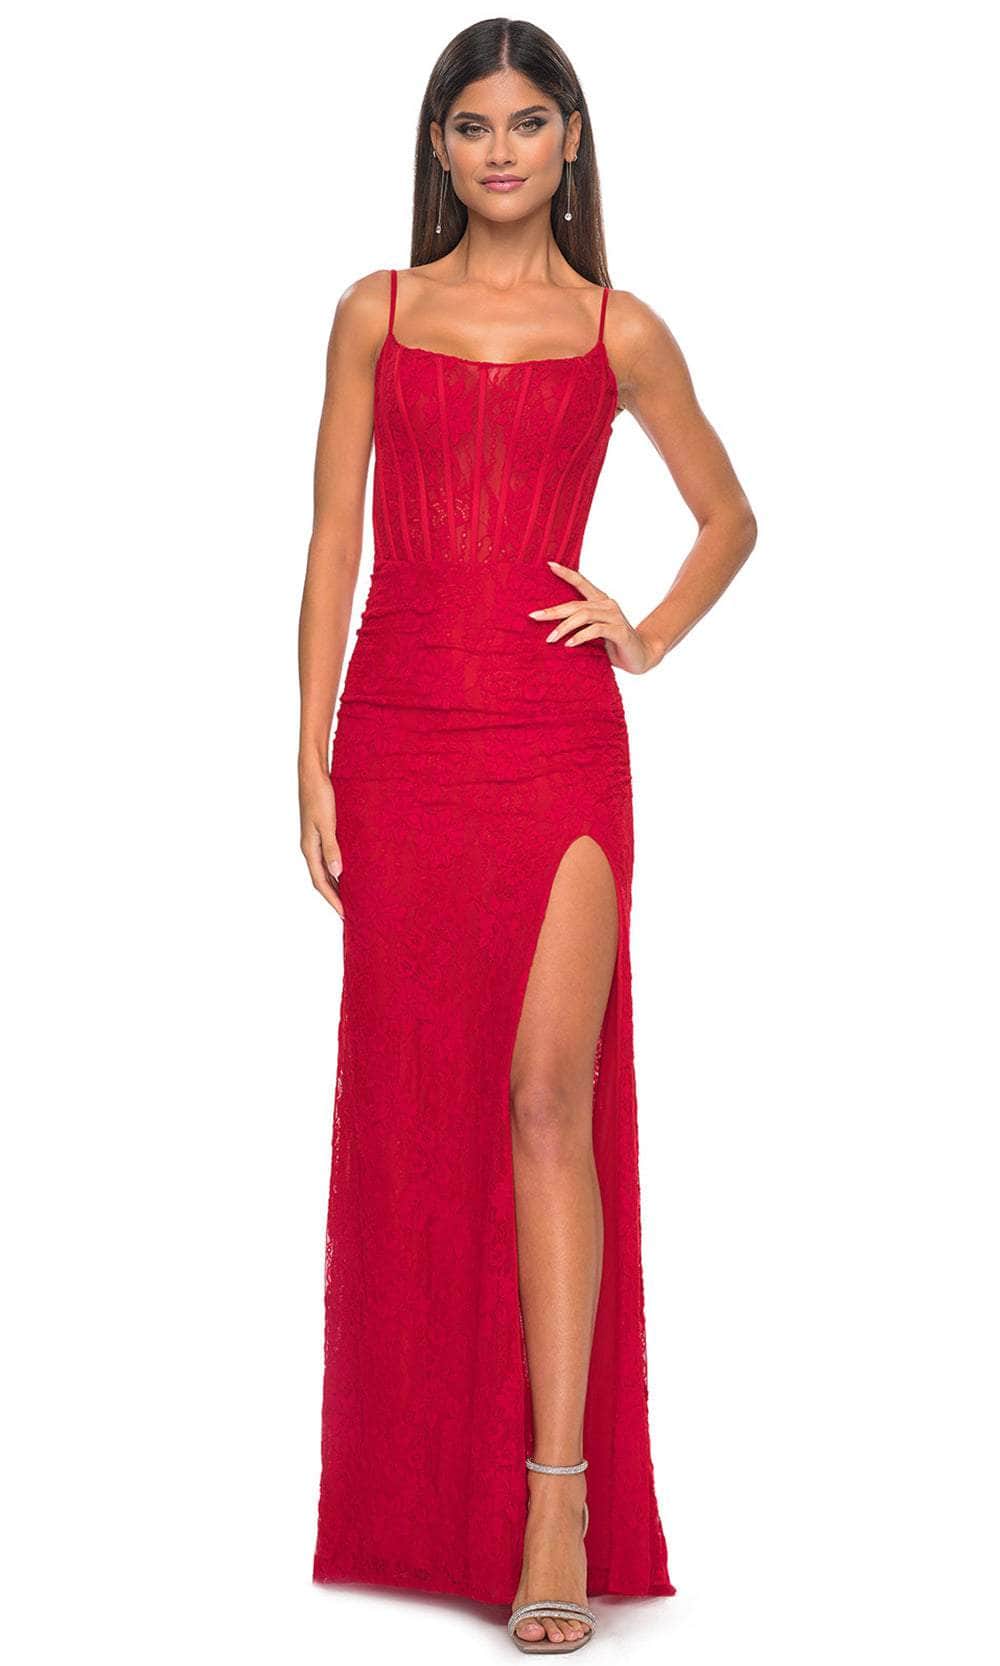 La Femme 32237 - Stretch Lace Corset Prom Gown Evening Dresses 00 /  Red